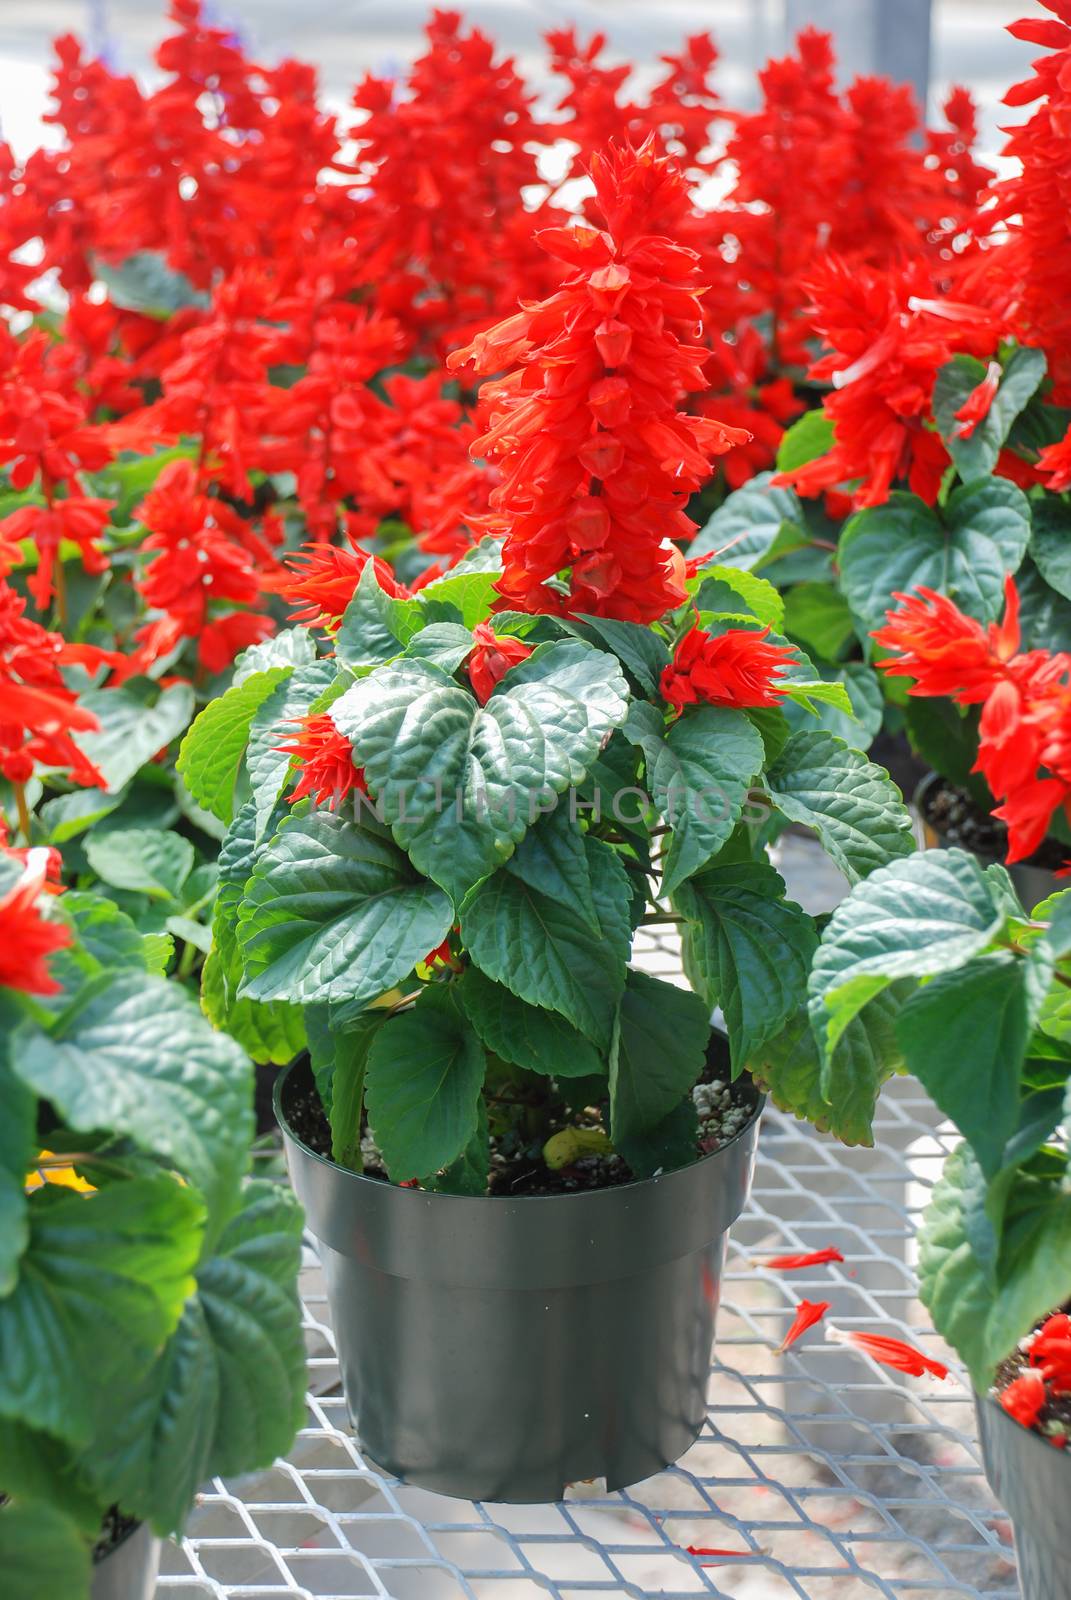 Red Salvia Splendens, Red flower pot plants in the black potted by yuiyuize